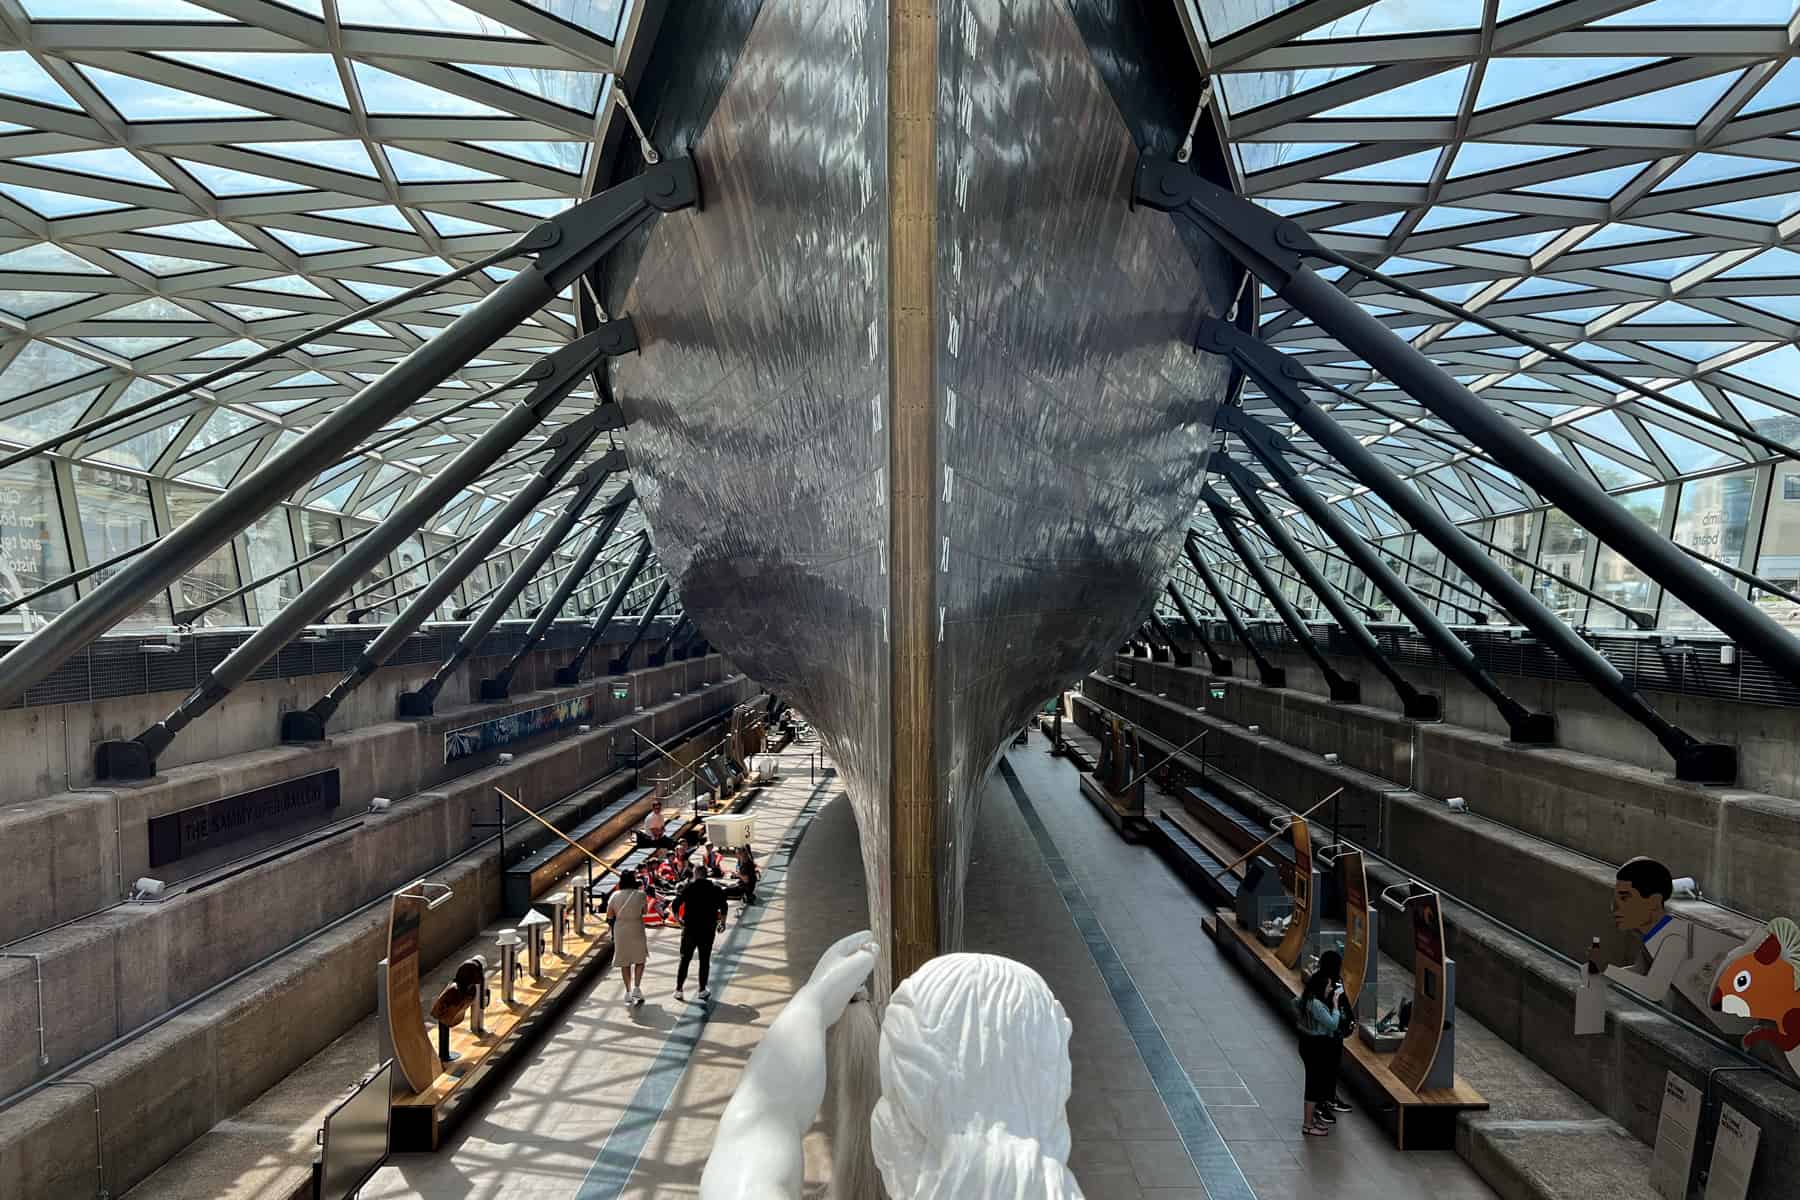 The Cutty Sark ship's gleaming copper hull underneath a glass roof and hoovering over museum space.